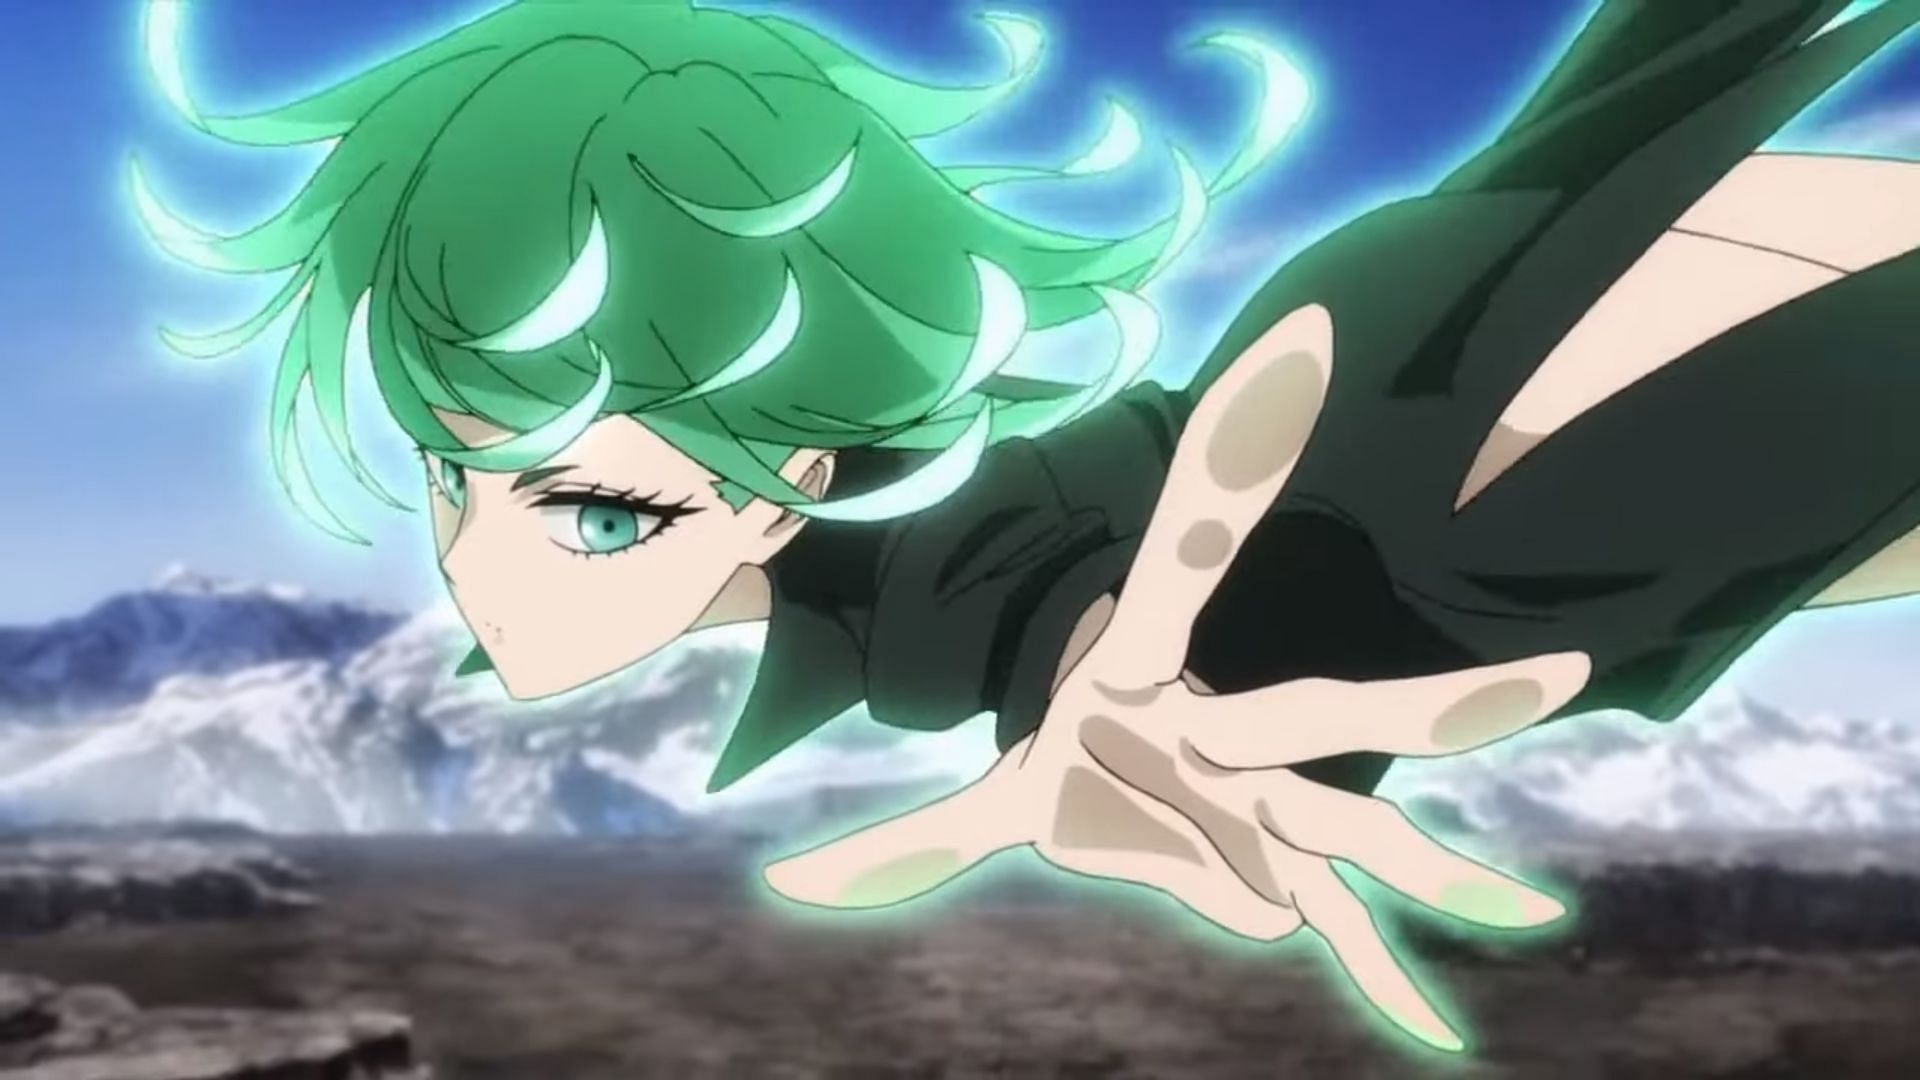 Tatsumaki using her psychic powers in One Punch Man anime (Image via Madhouse)